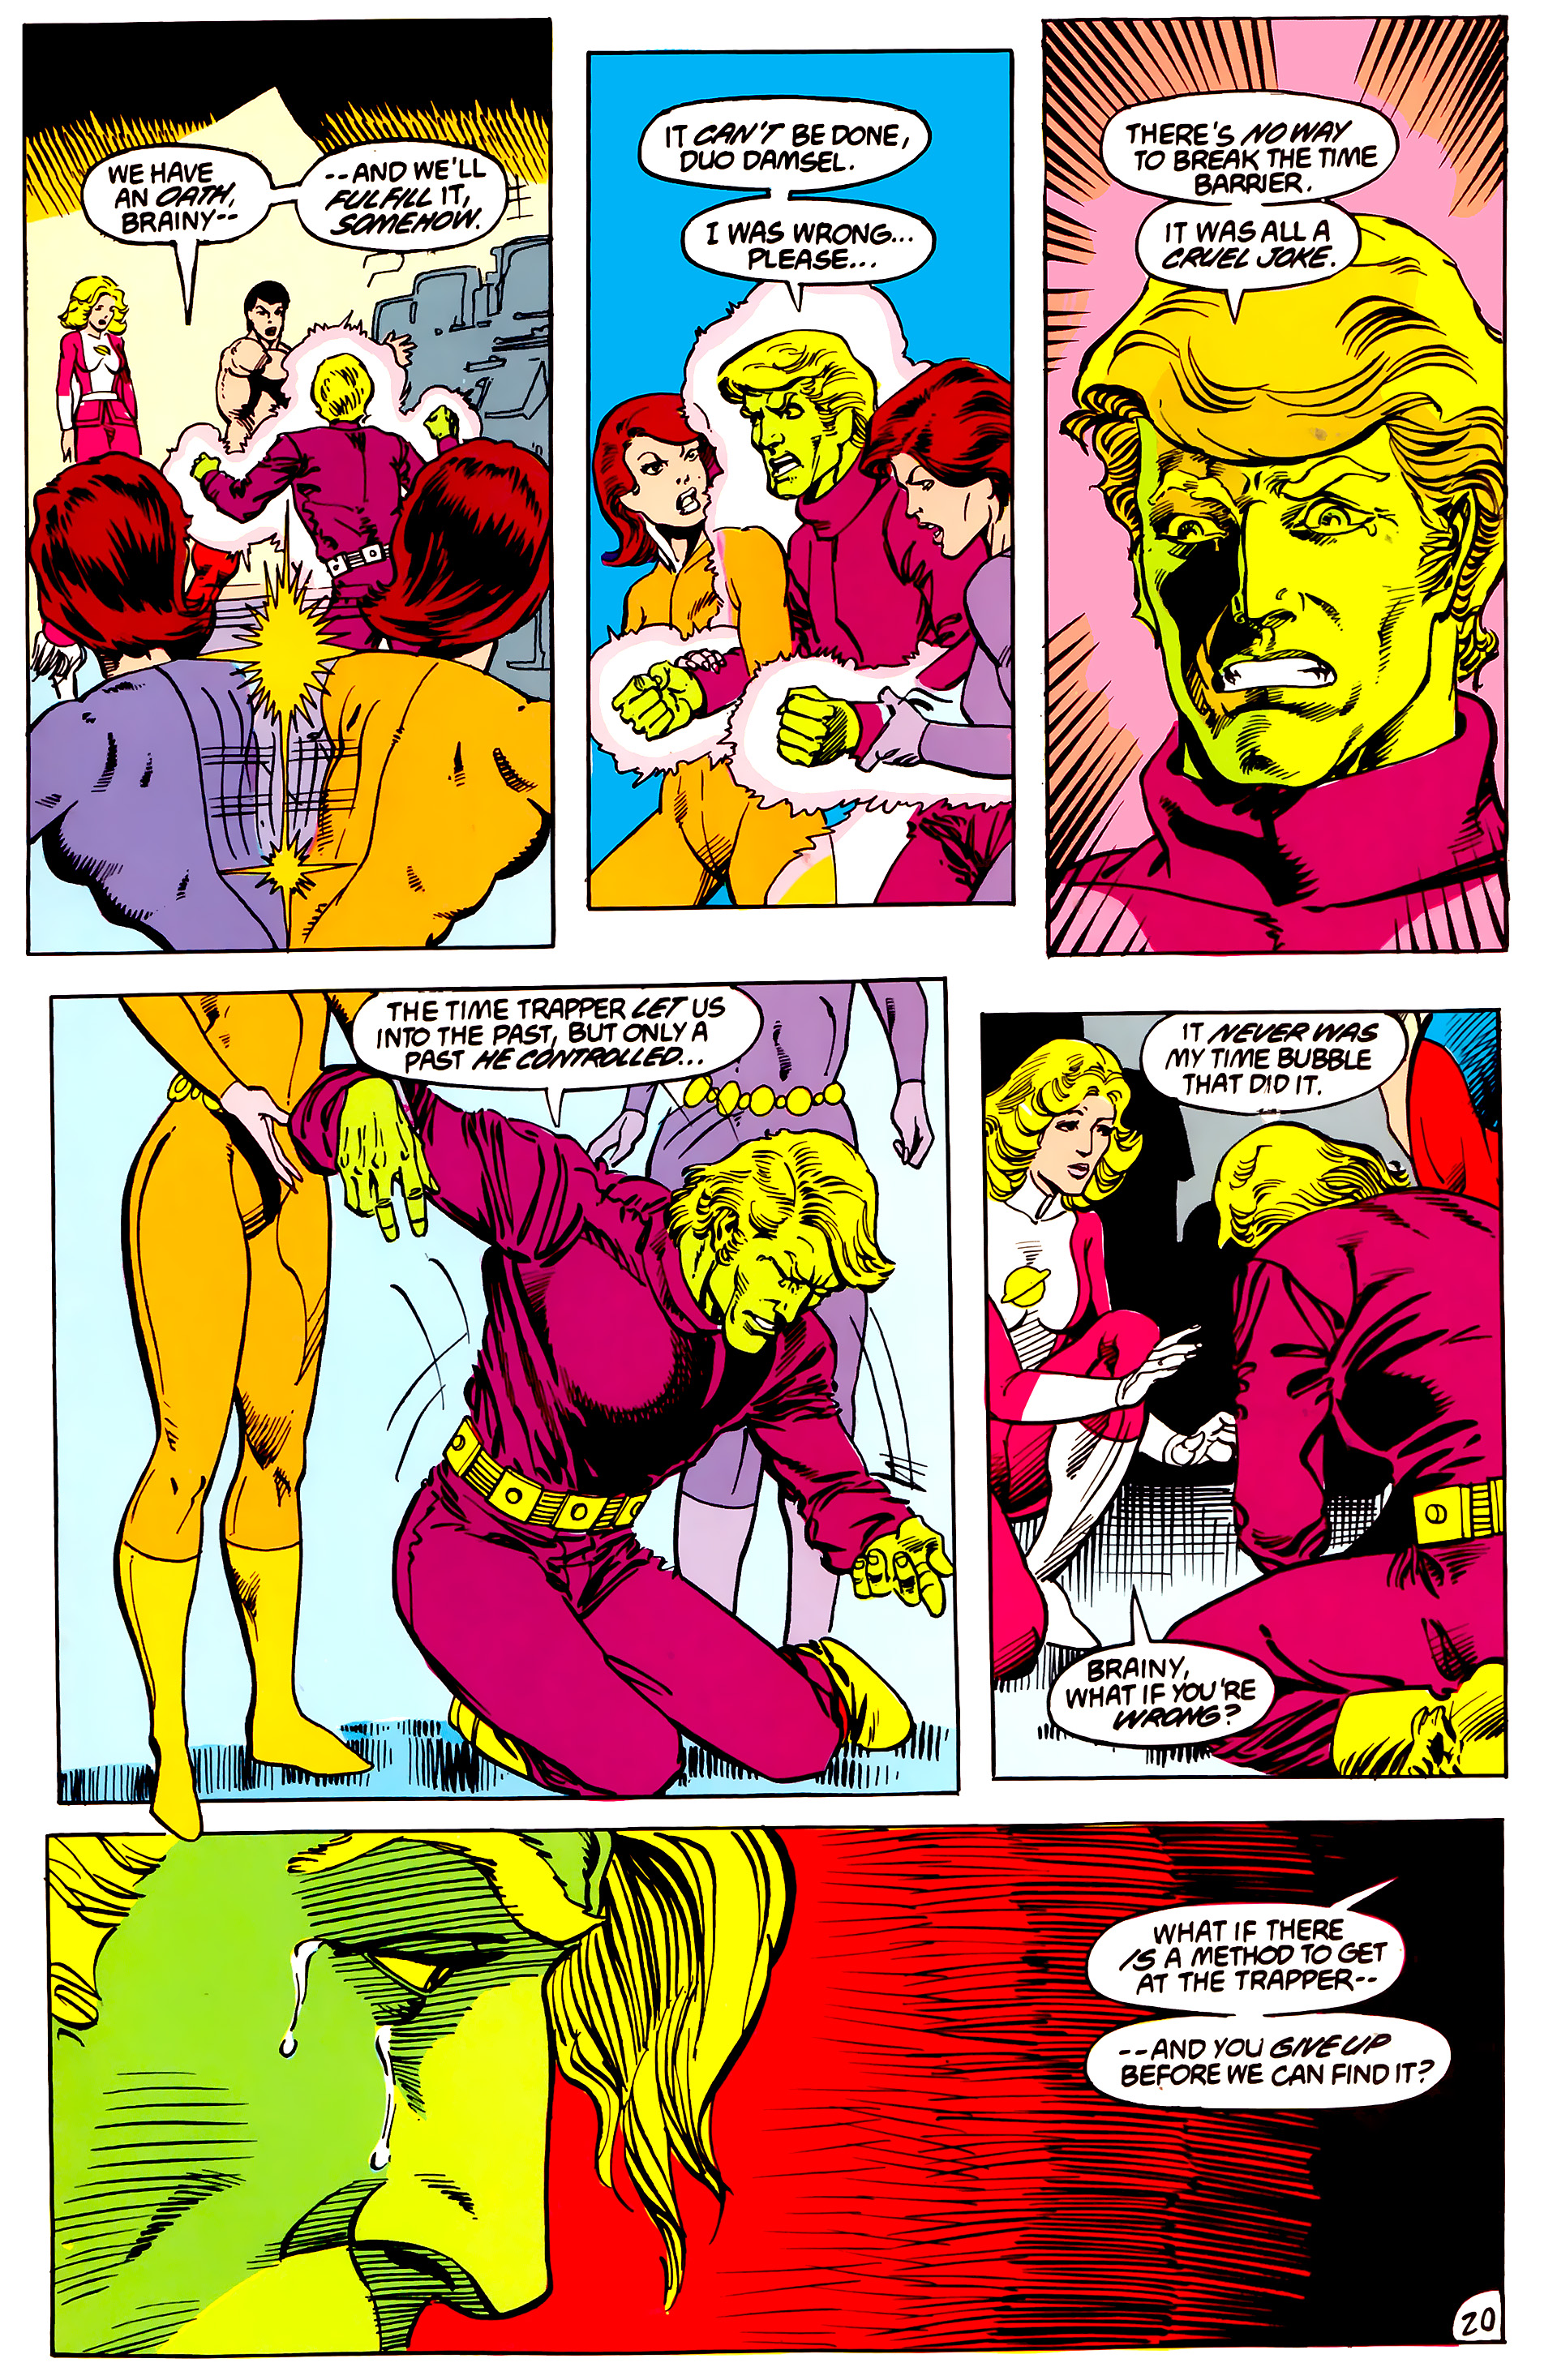 Legion of Super-Heroes (1984) 49 Page 20